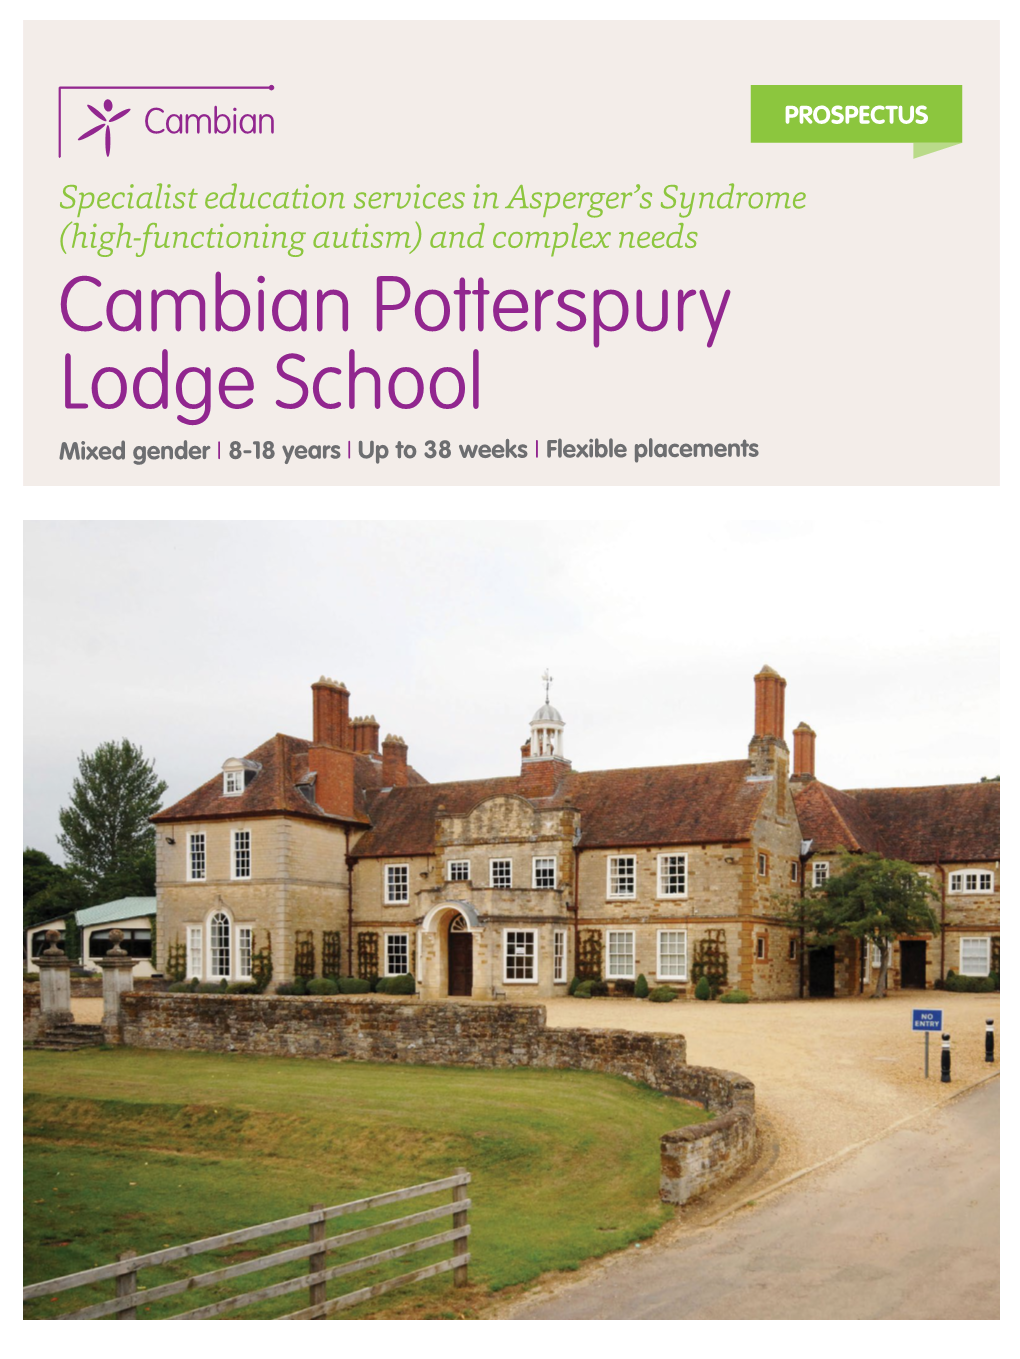 Cambian Potterspury Lodge School Mixed Gender I 8-18 Years I up to 38 Weeks I Flexible Placements